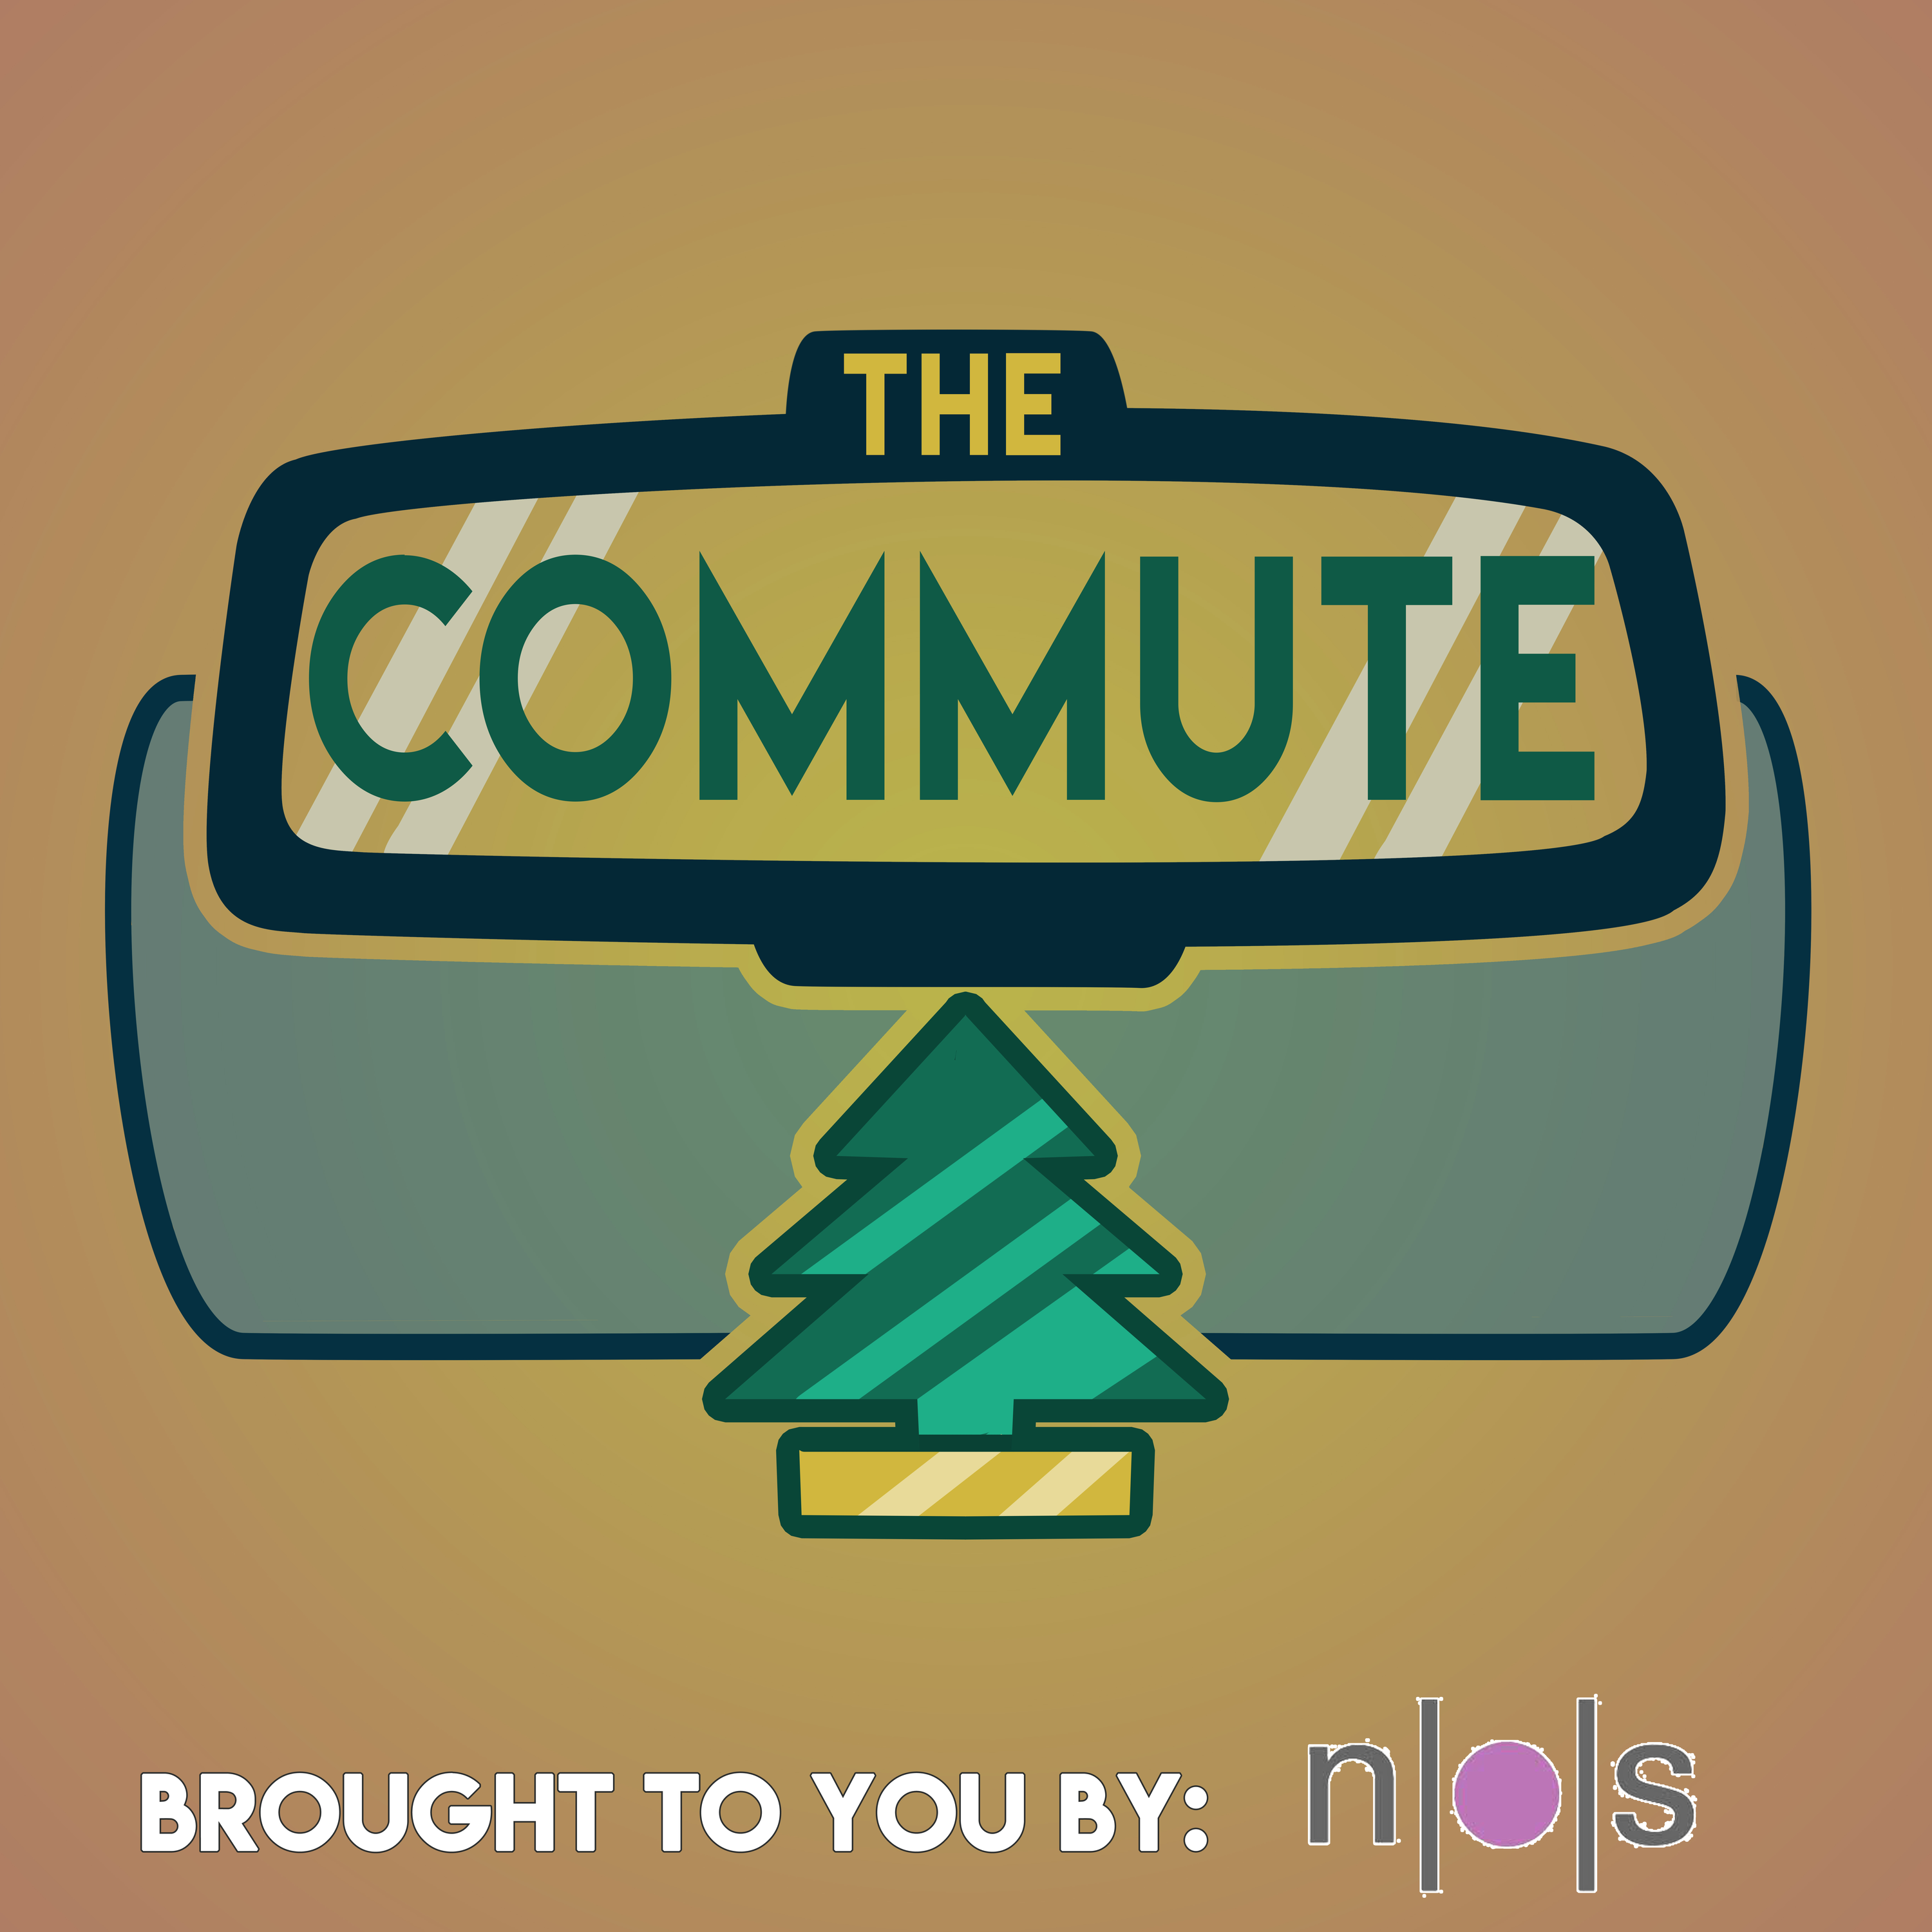 The Commute, December 2 (Jared Downs on Eggs & Issues and what local business community asked from Savannah legislators)